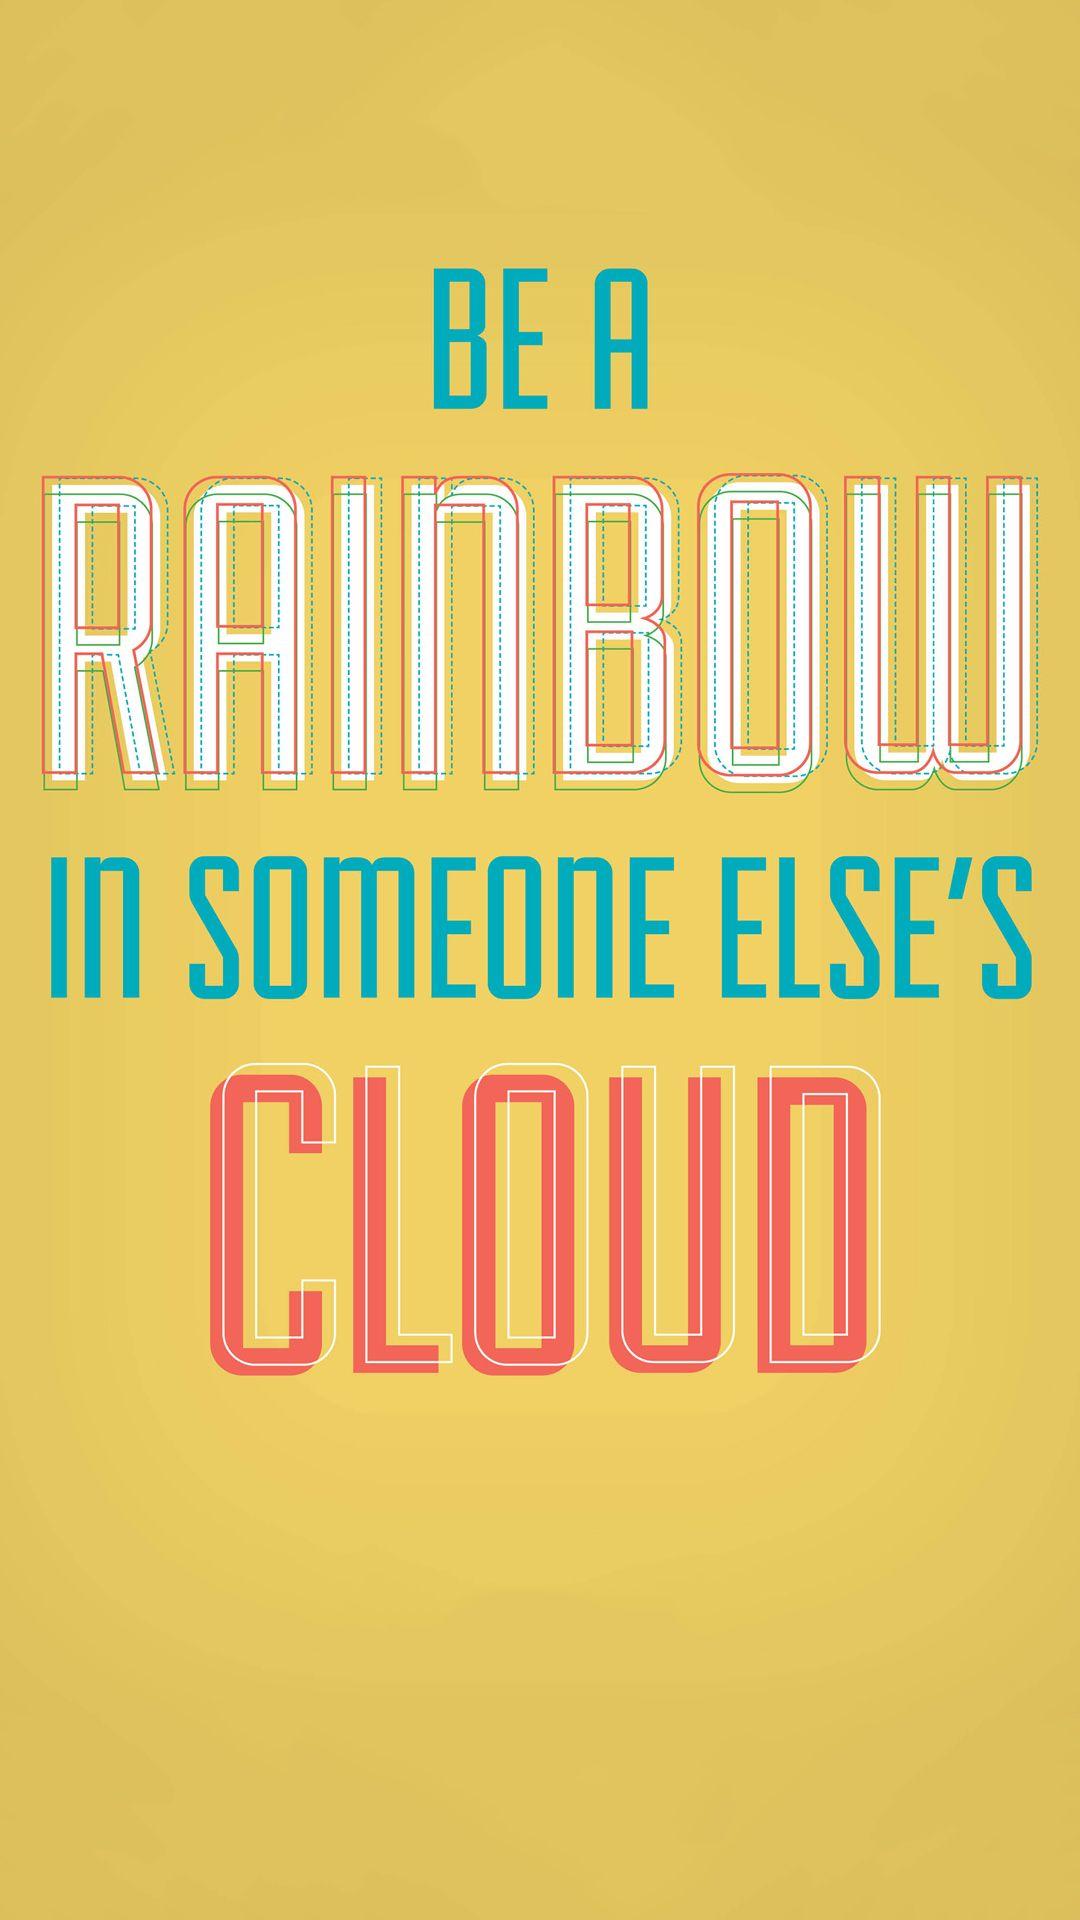 A Rainbow Motivational Android Wallpaper free download